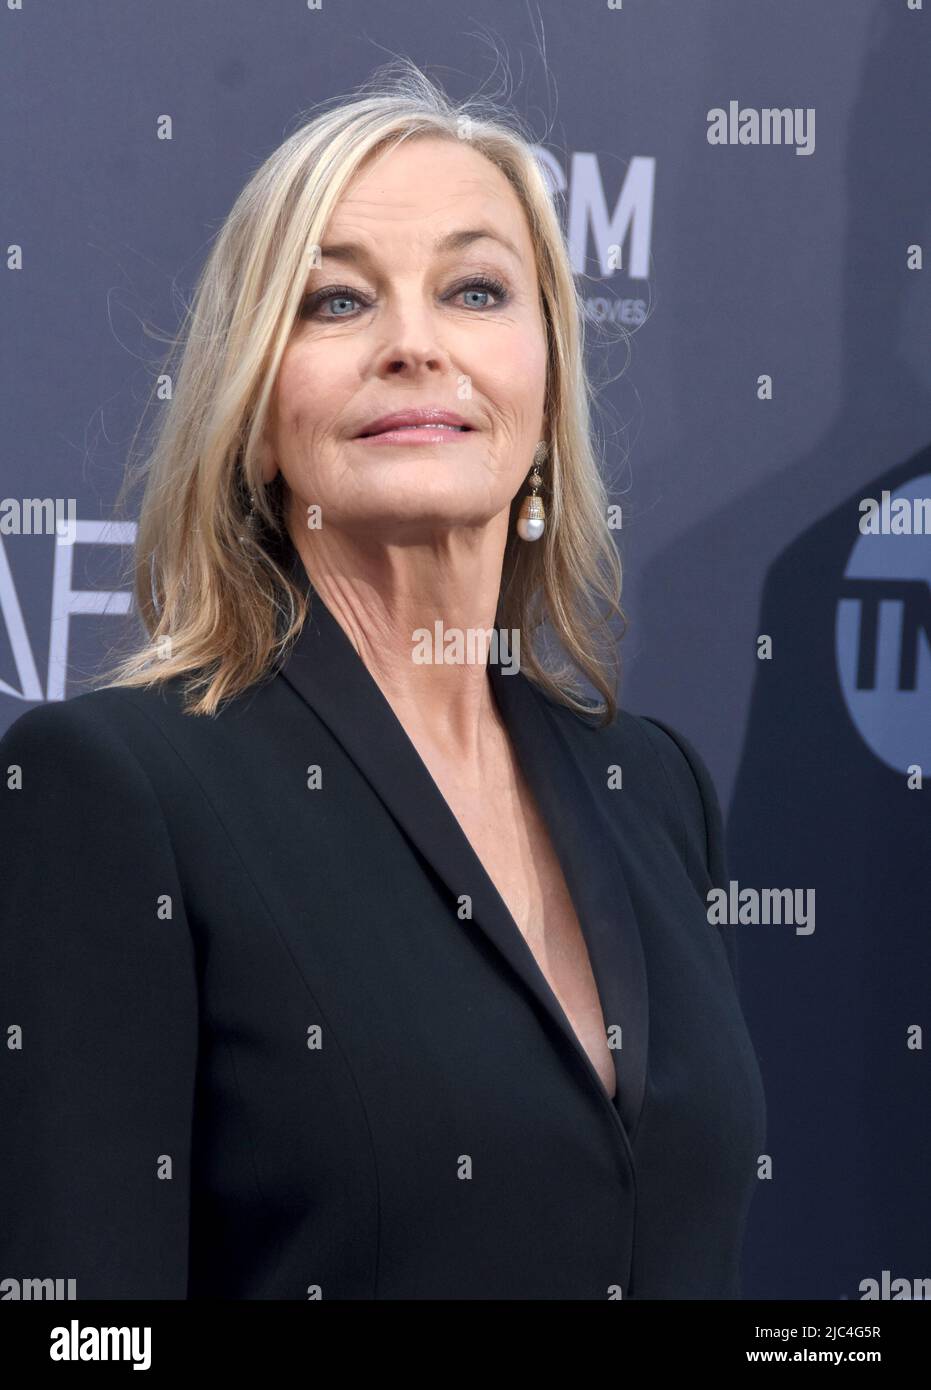 Hollywood, California, USA 9th June 2022 Actress Bo Derek attends American Film Institute Life Achievement Award Tribute Gala to Julie Andrews at Dolby Theatre on June 9, 2022 in Hollywood, California, USA. Photo by Barry King/Alamy Live News Stock Photo